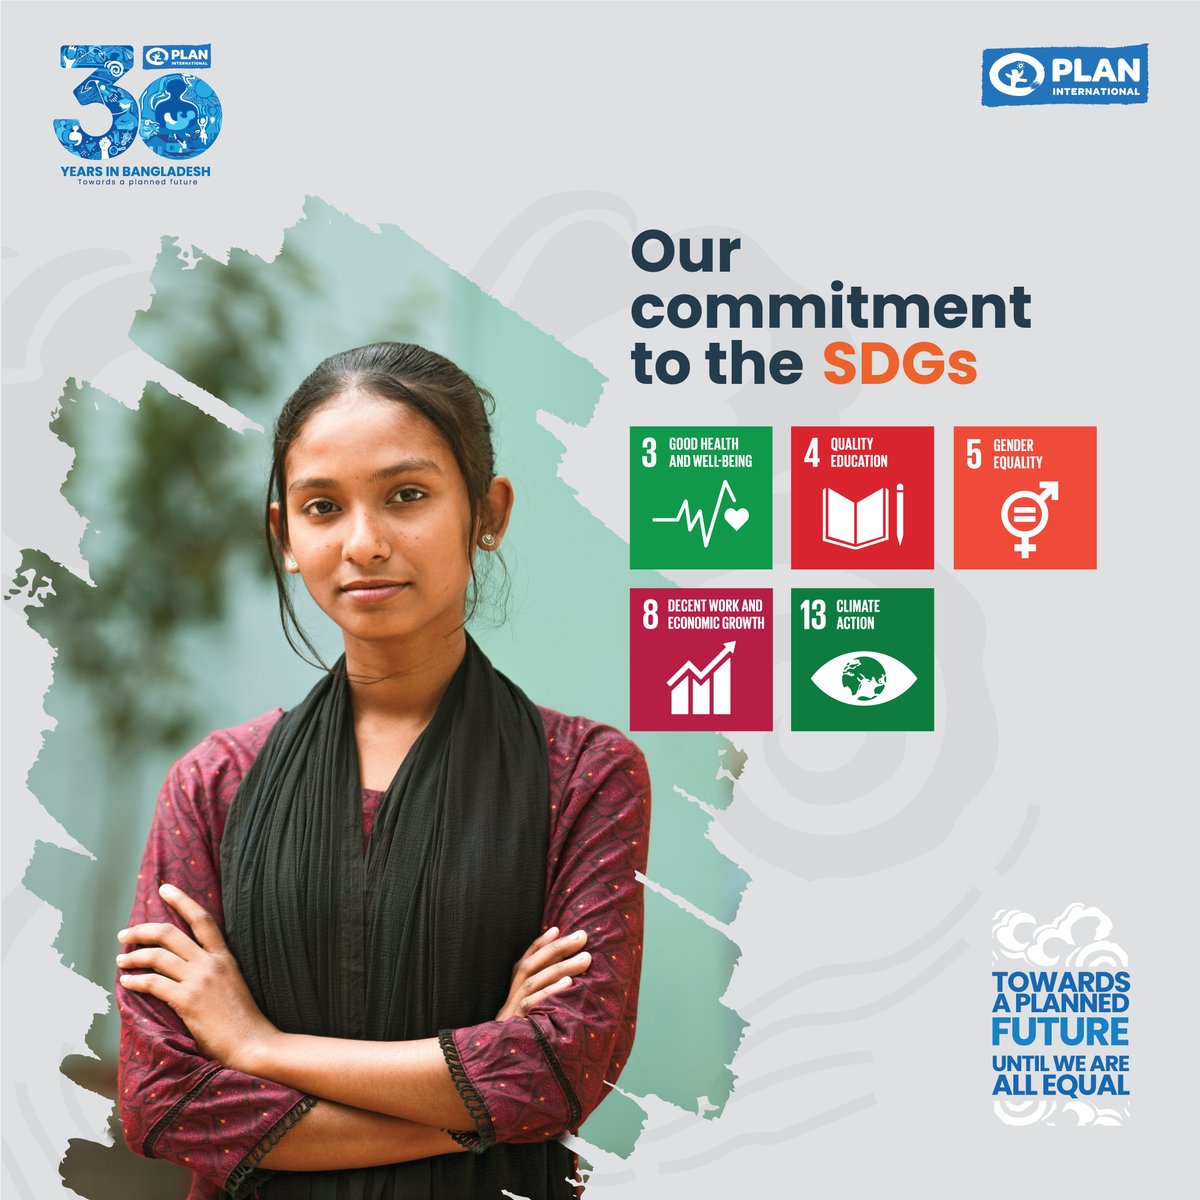 Join us fo 30 years of transformative impact! @PlanBangladesh remains steadfast in its commitment to 5 SDG goals: good health & well-being, quality education, gender equality, decent work & economic growth & climate action. Together, we're shaping a future where everyone thrives.